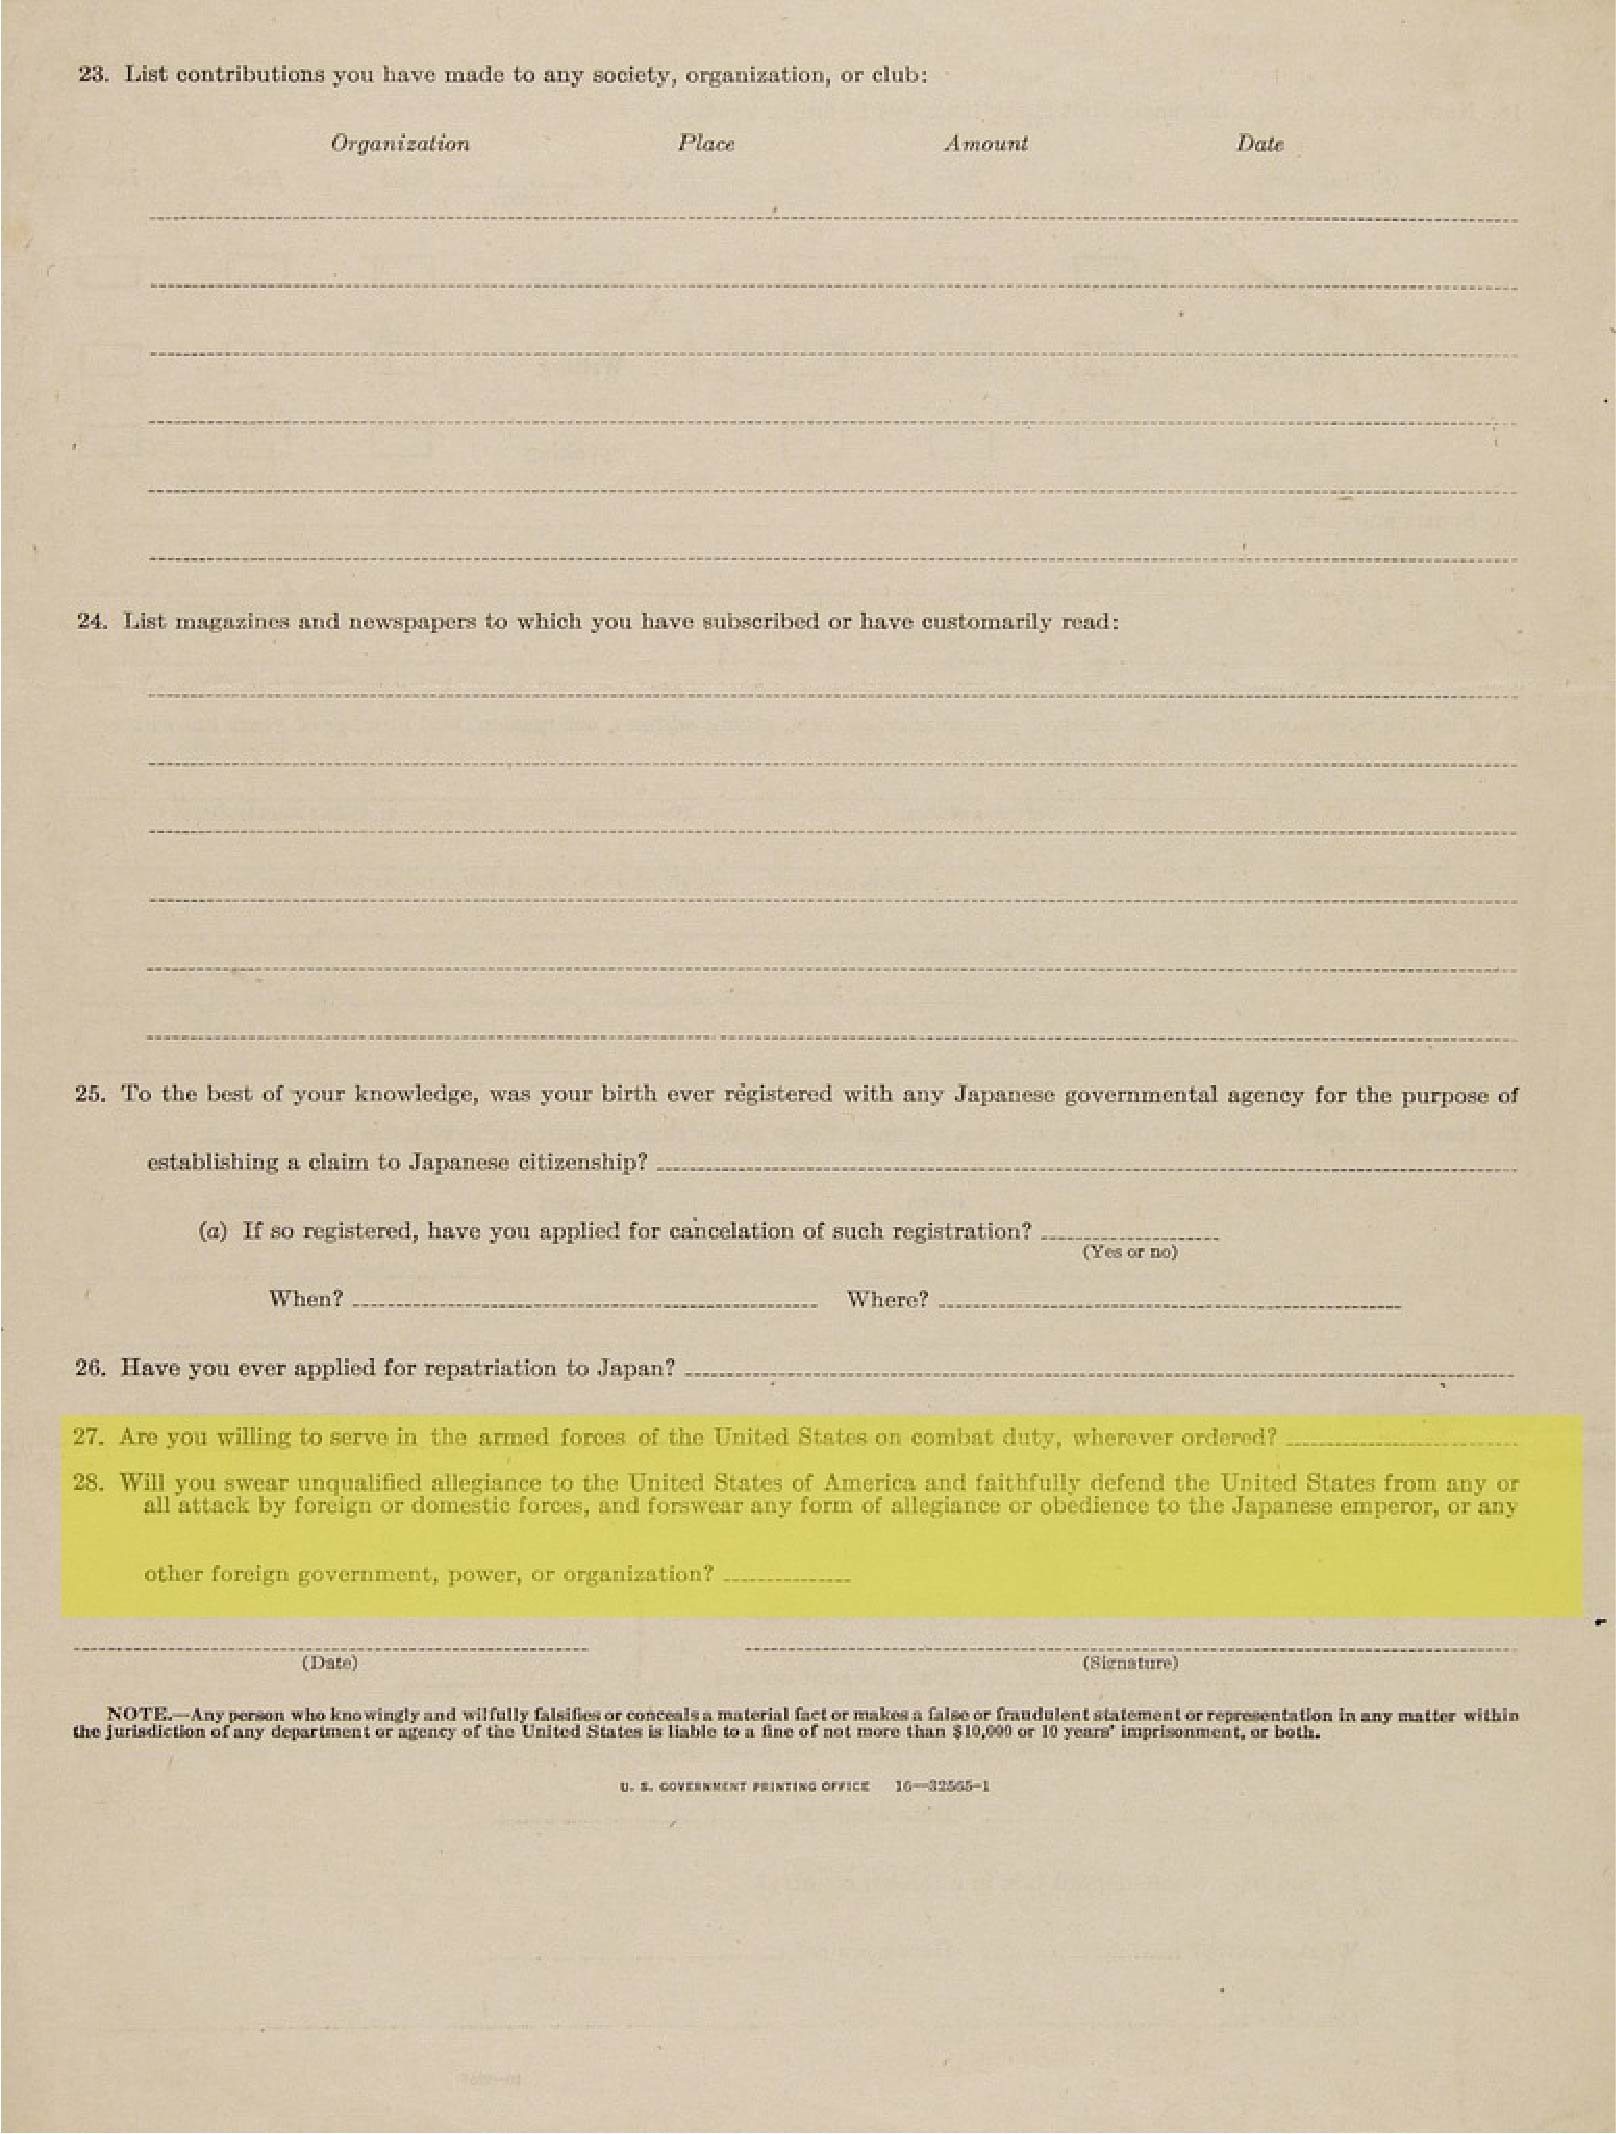 A page of the loyalty questionnaire with questions 27 and 28.